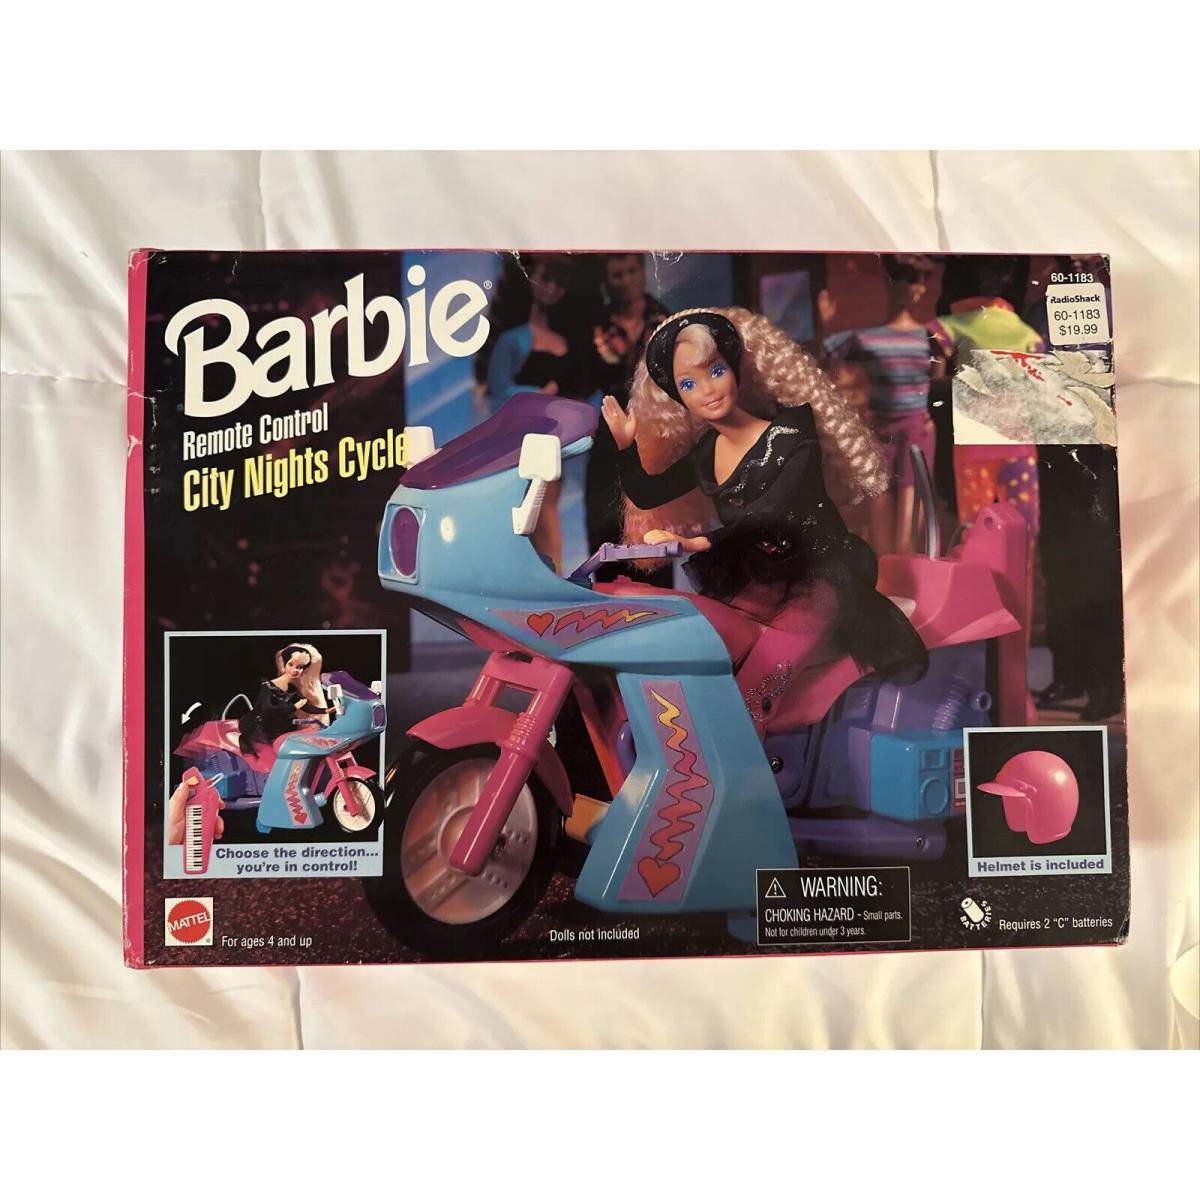 Barbie 1995 Remote Control City Nights Cycle Battery Operated Play Set 7005